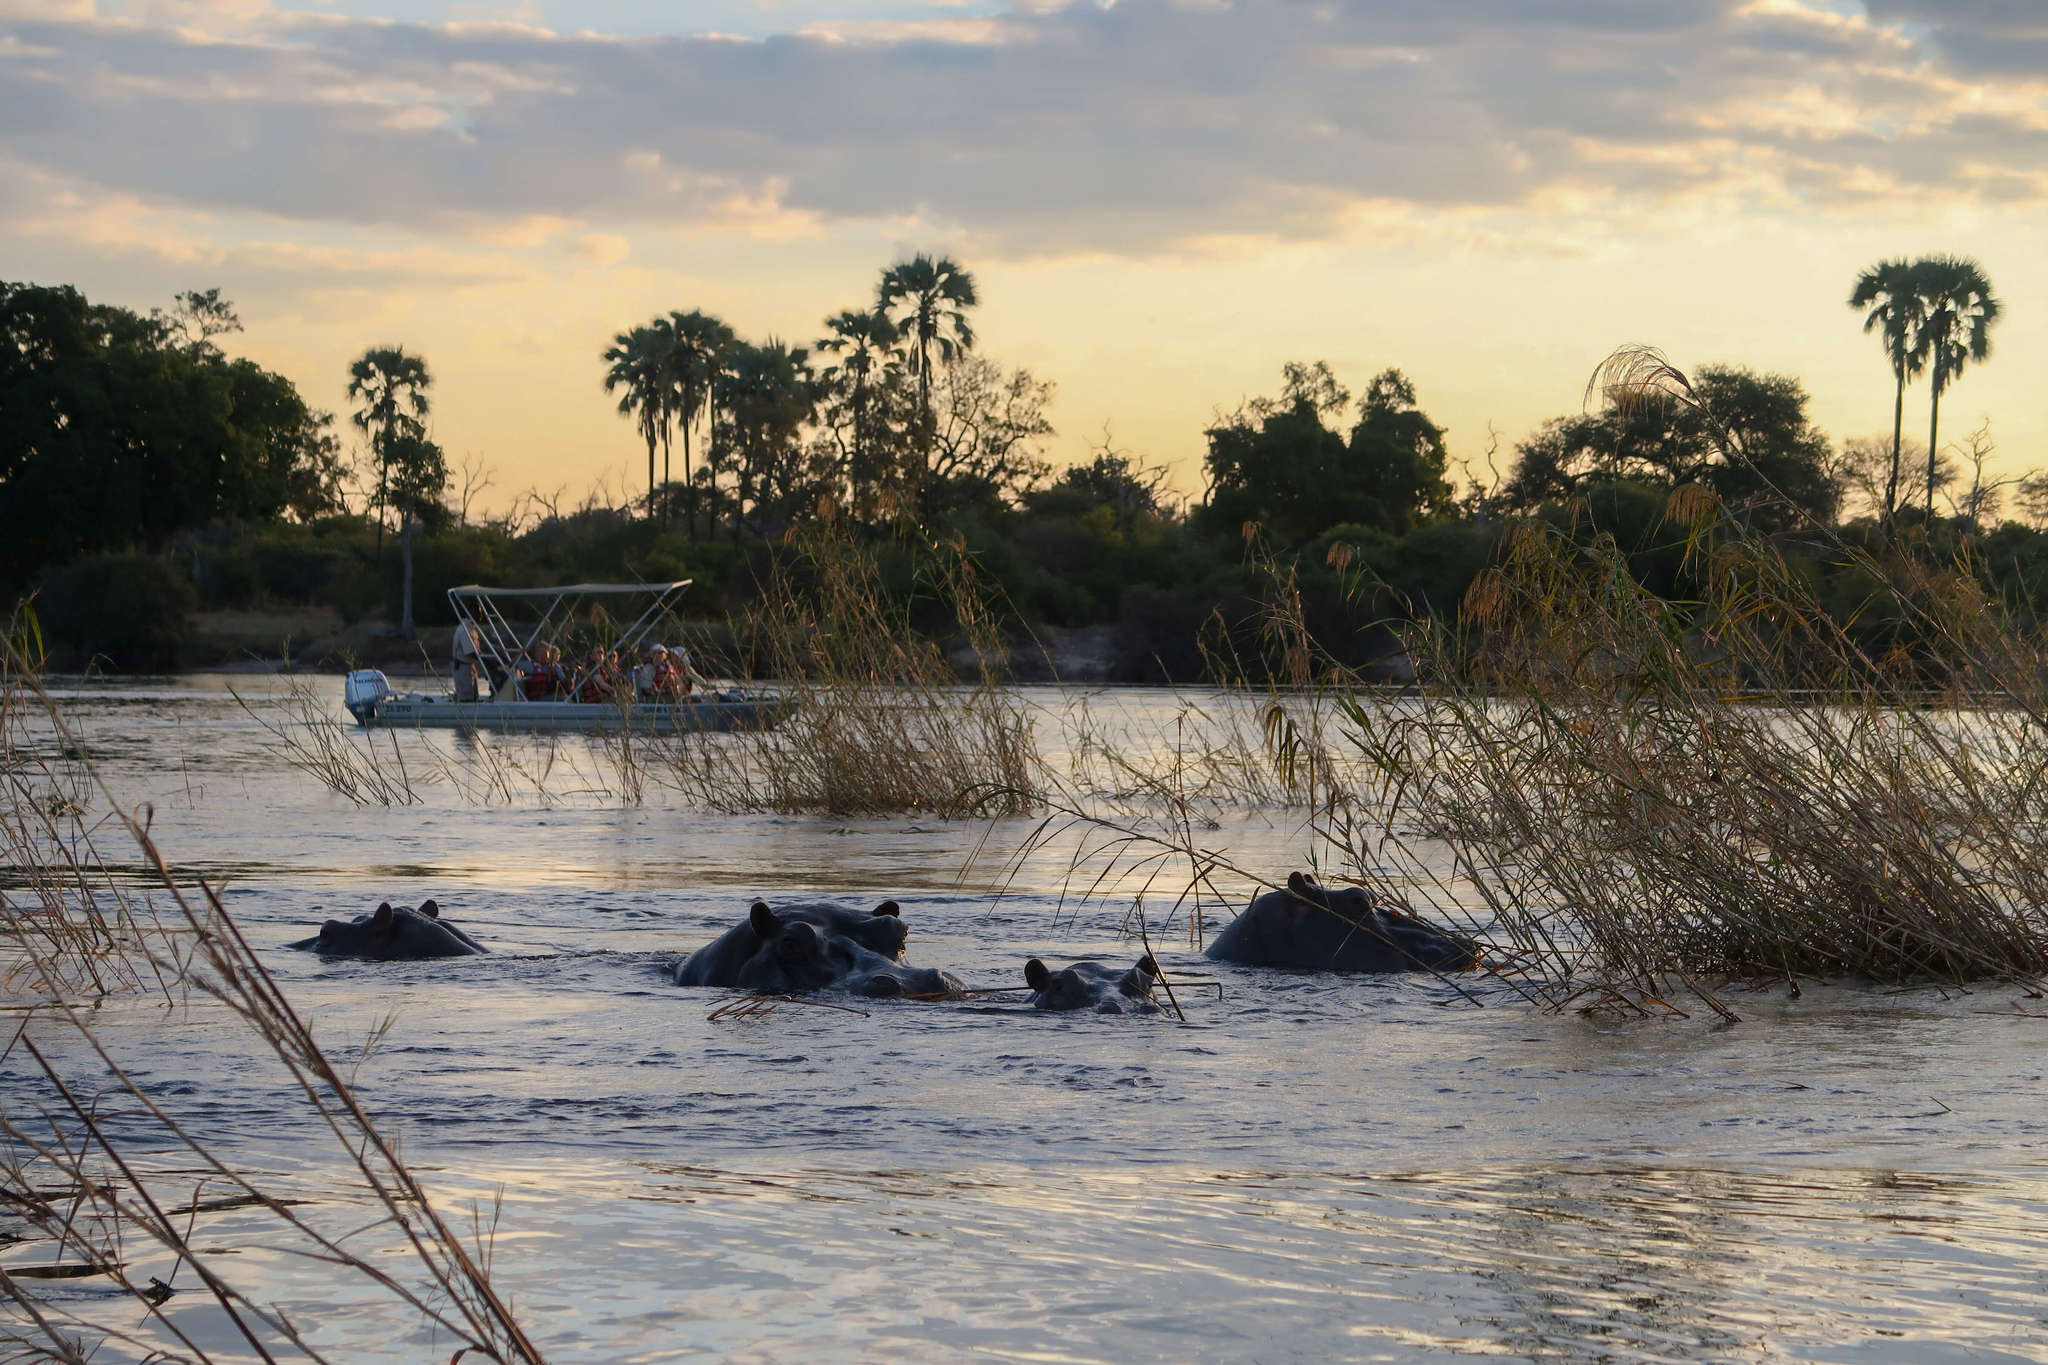 Hippos in the water in zambia